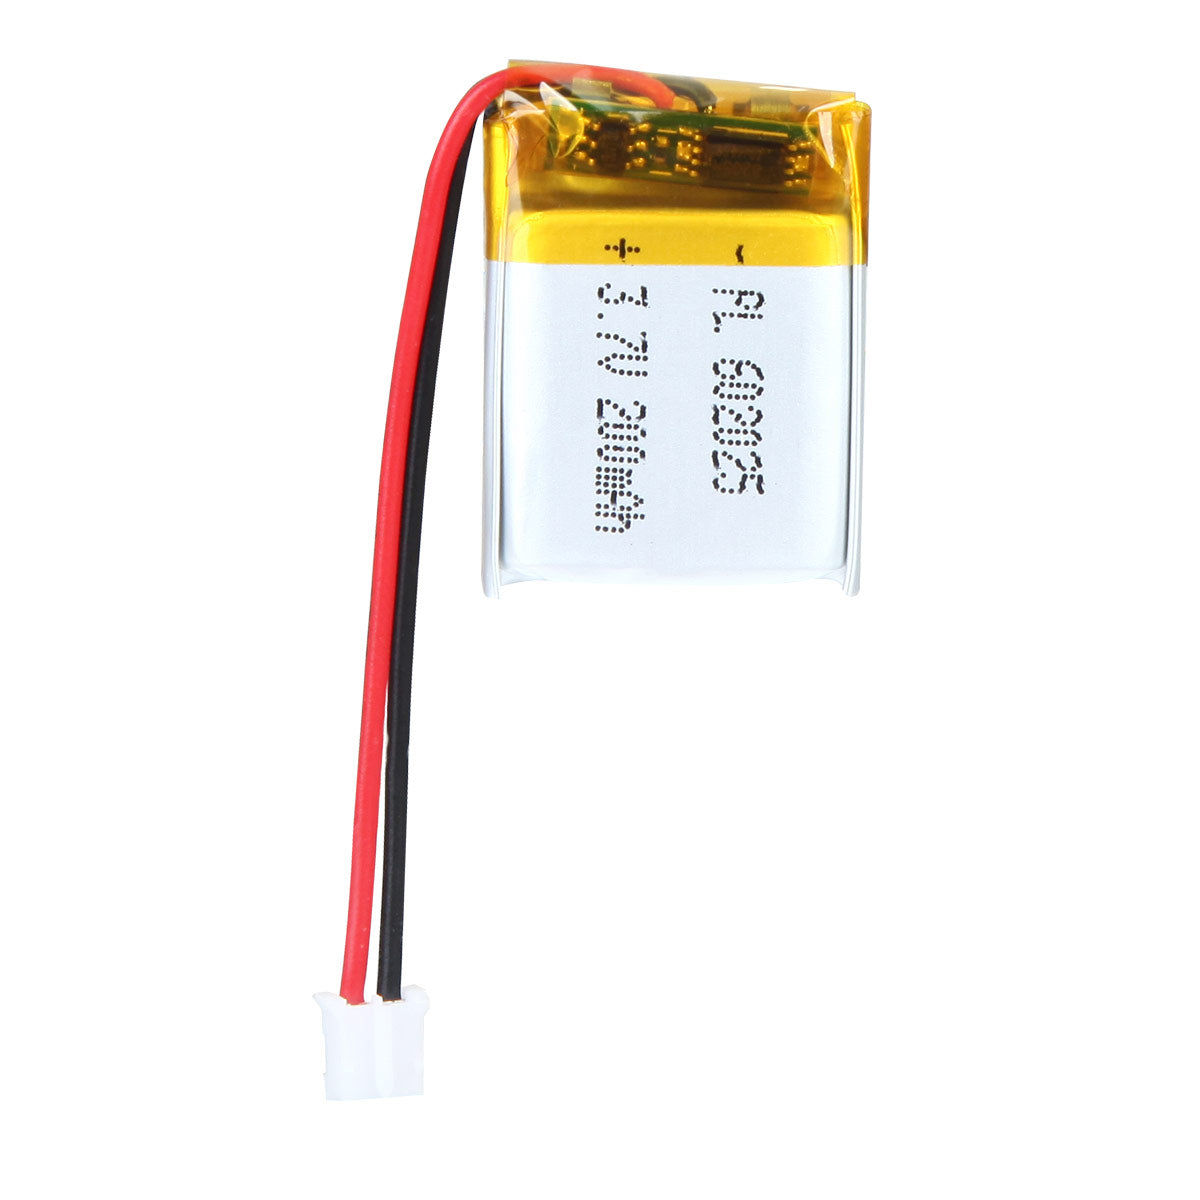 YDL 3.7V 200mAh 602025 Rechargeable Polymer Lithium-Ion Battery